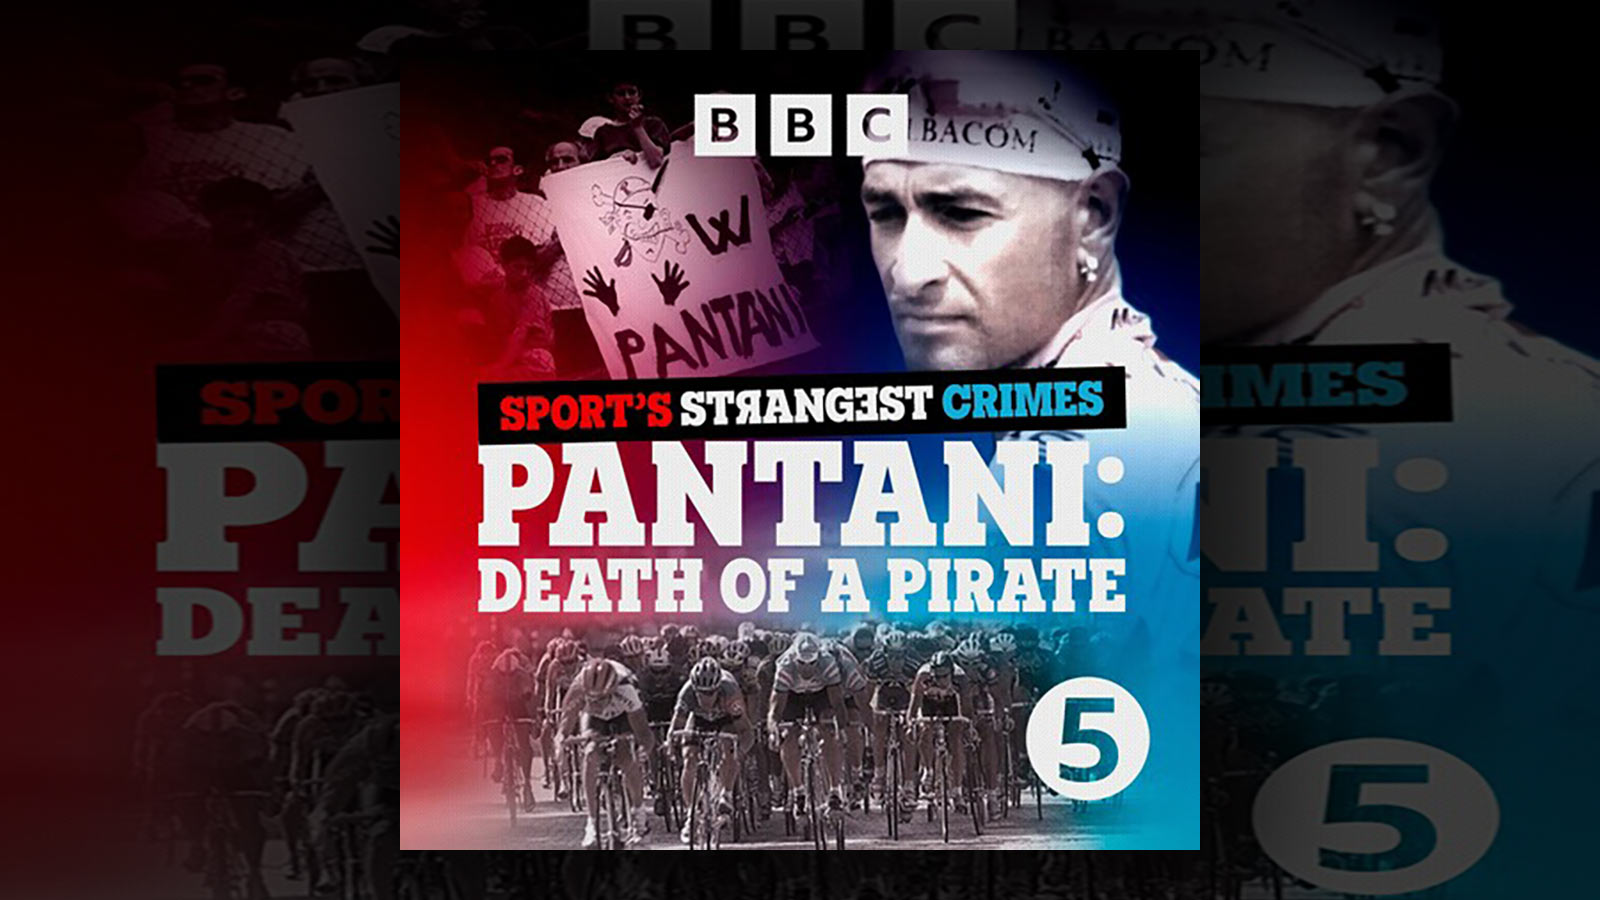 BBC’s “Sport’s Strangest Crimes” Digs into the Death of Marco Pantani